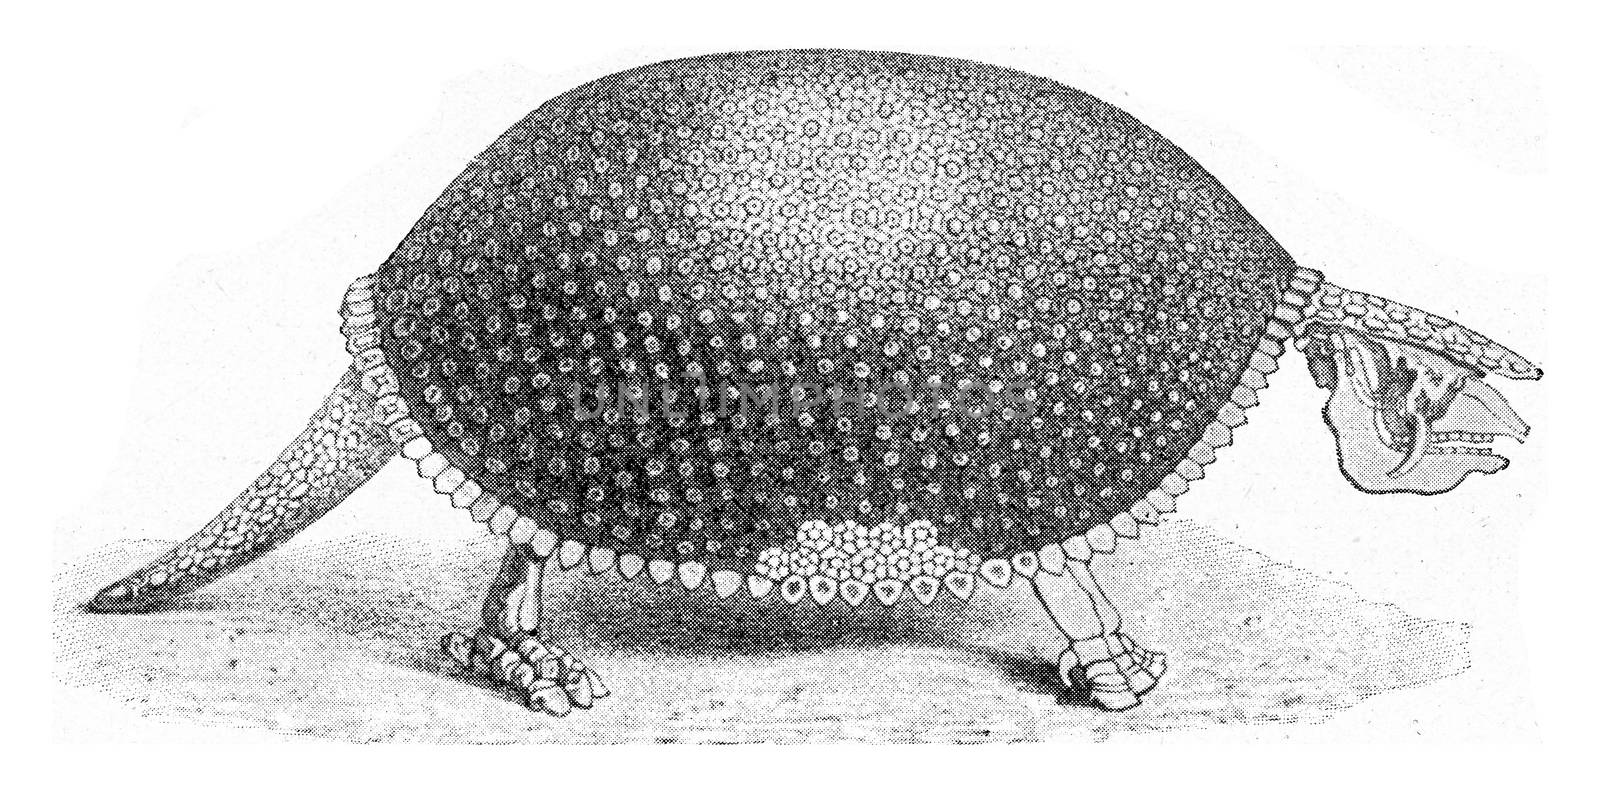 Glyptodon, a fossil armadillo, vintage engraving. by Morphart